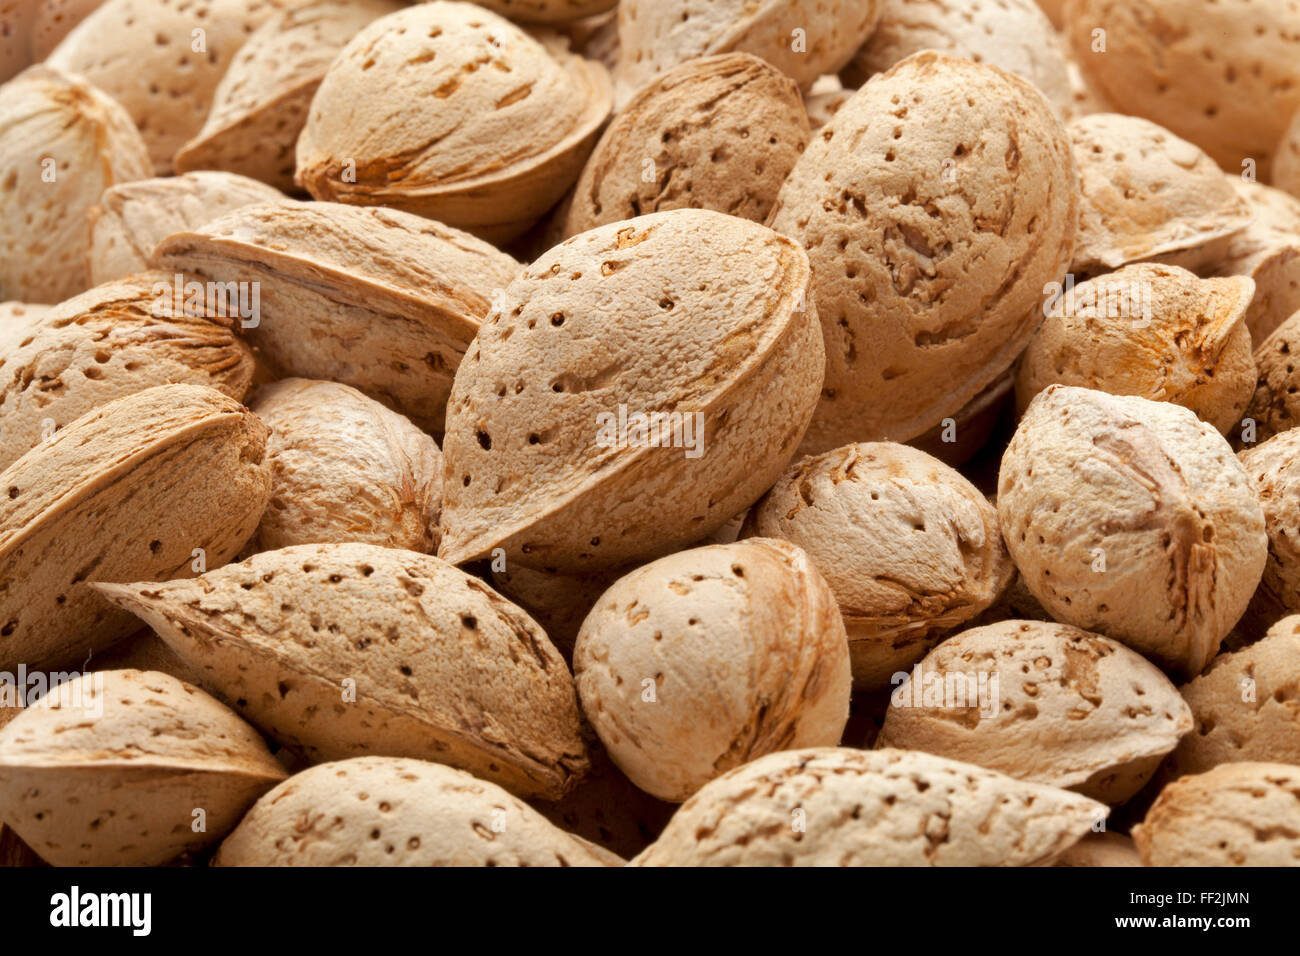 Whole Almonds in the pod full frame Stock Photo